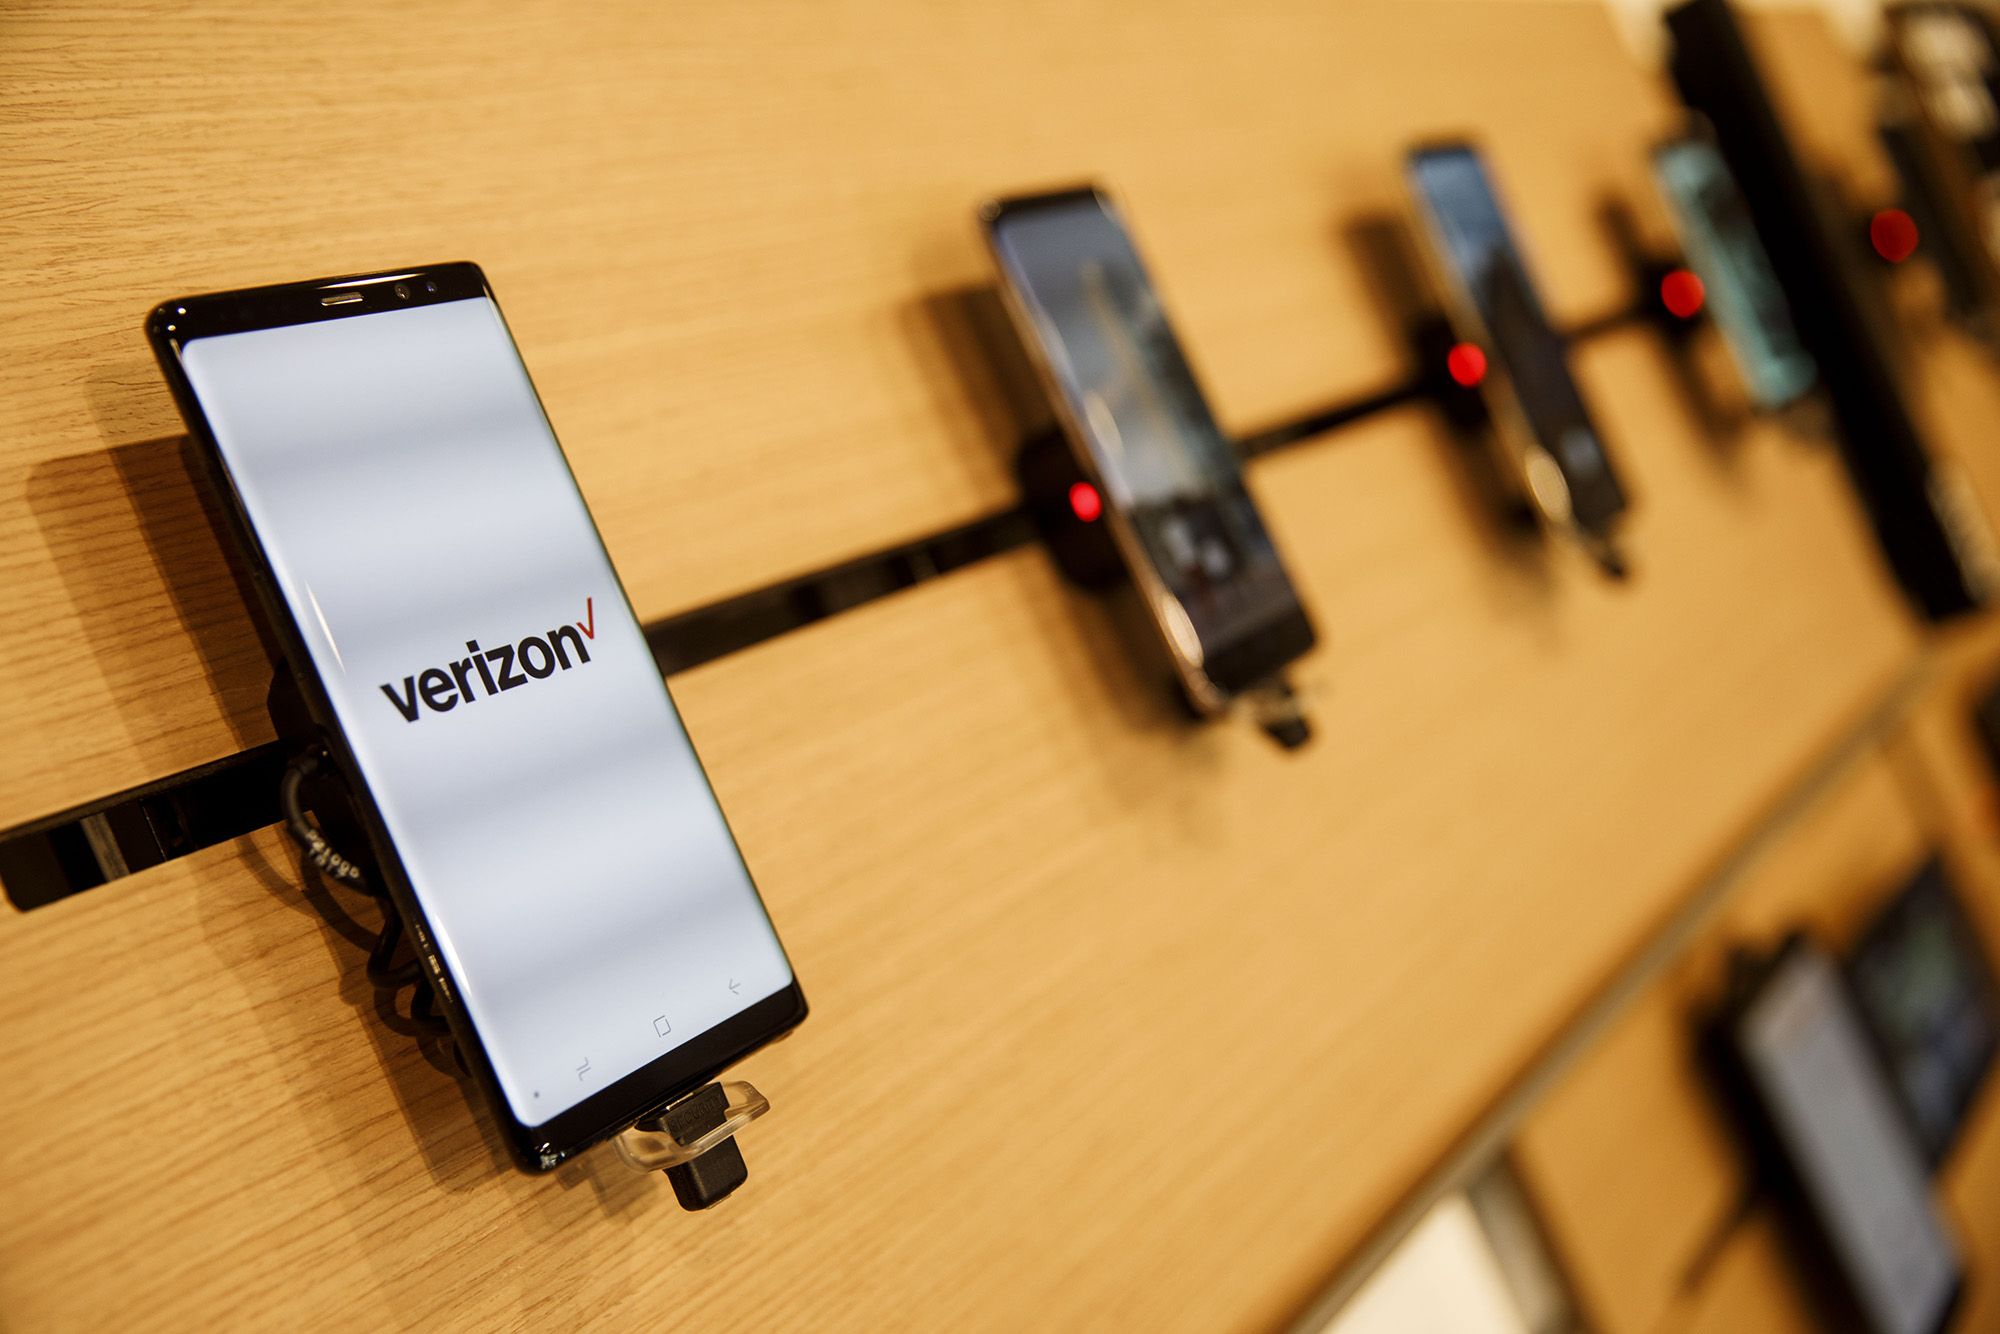 Today is the final day to claim your slice of a $100 million Verizon settlement